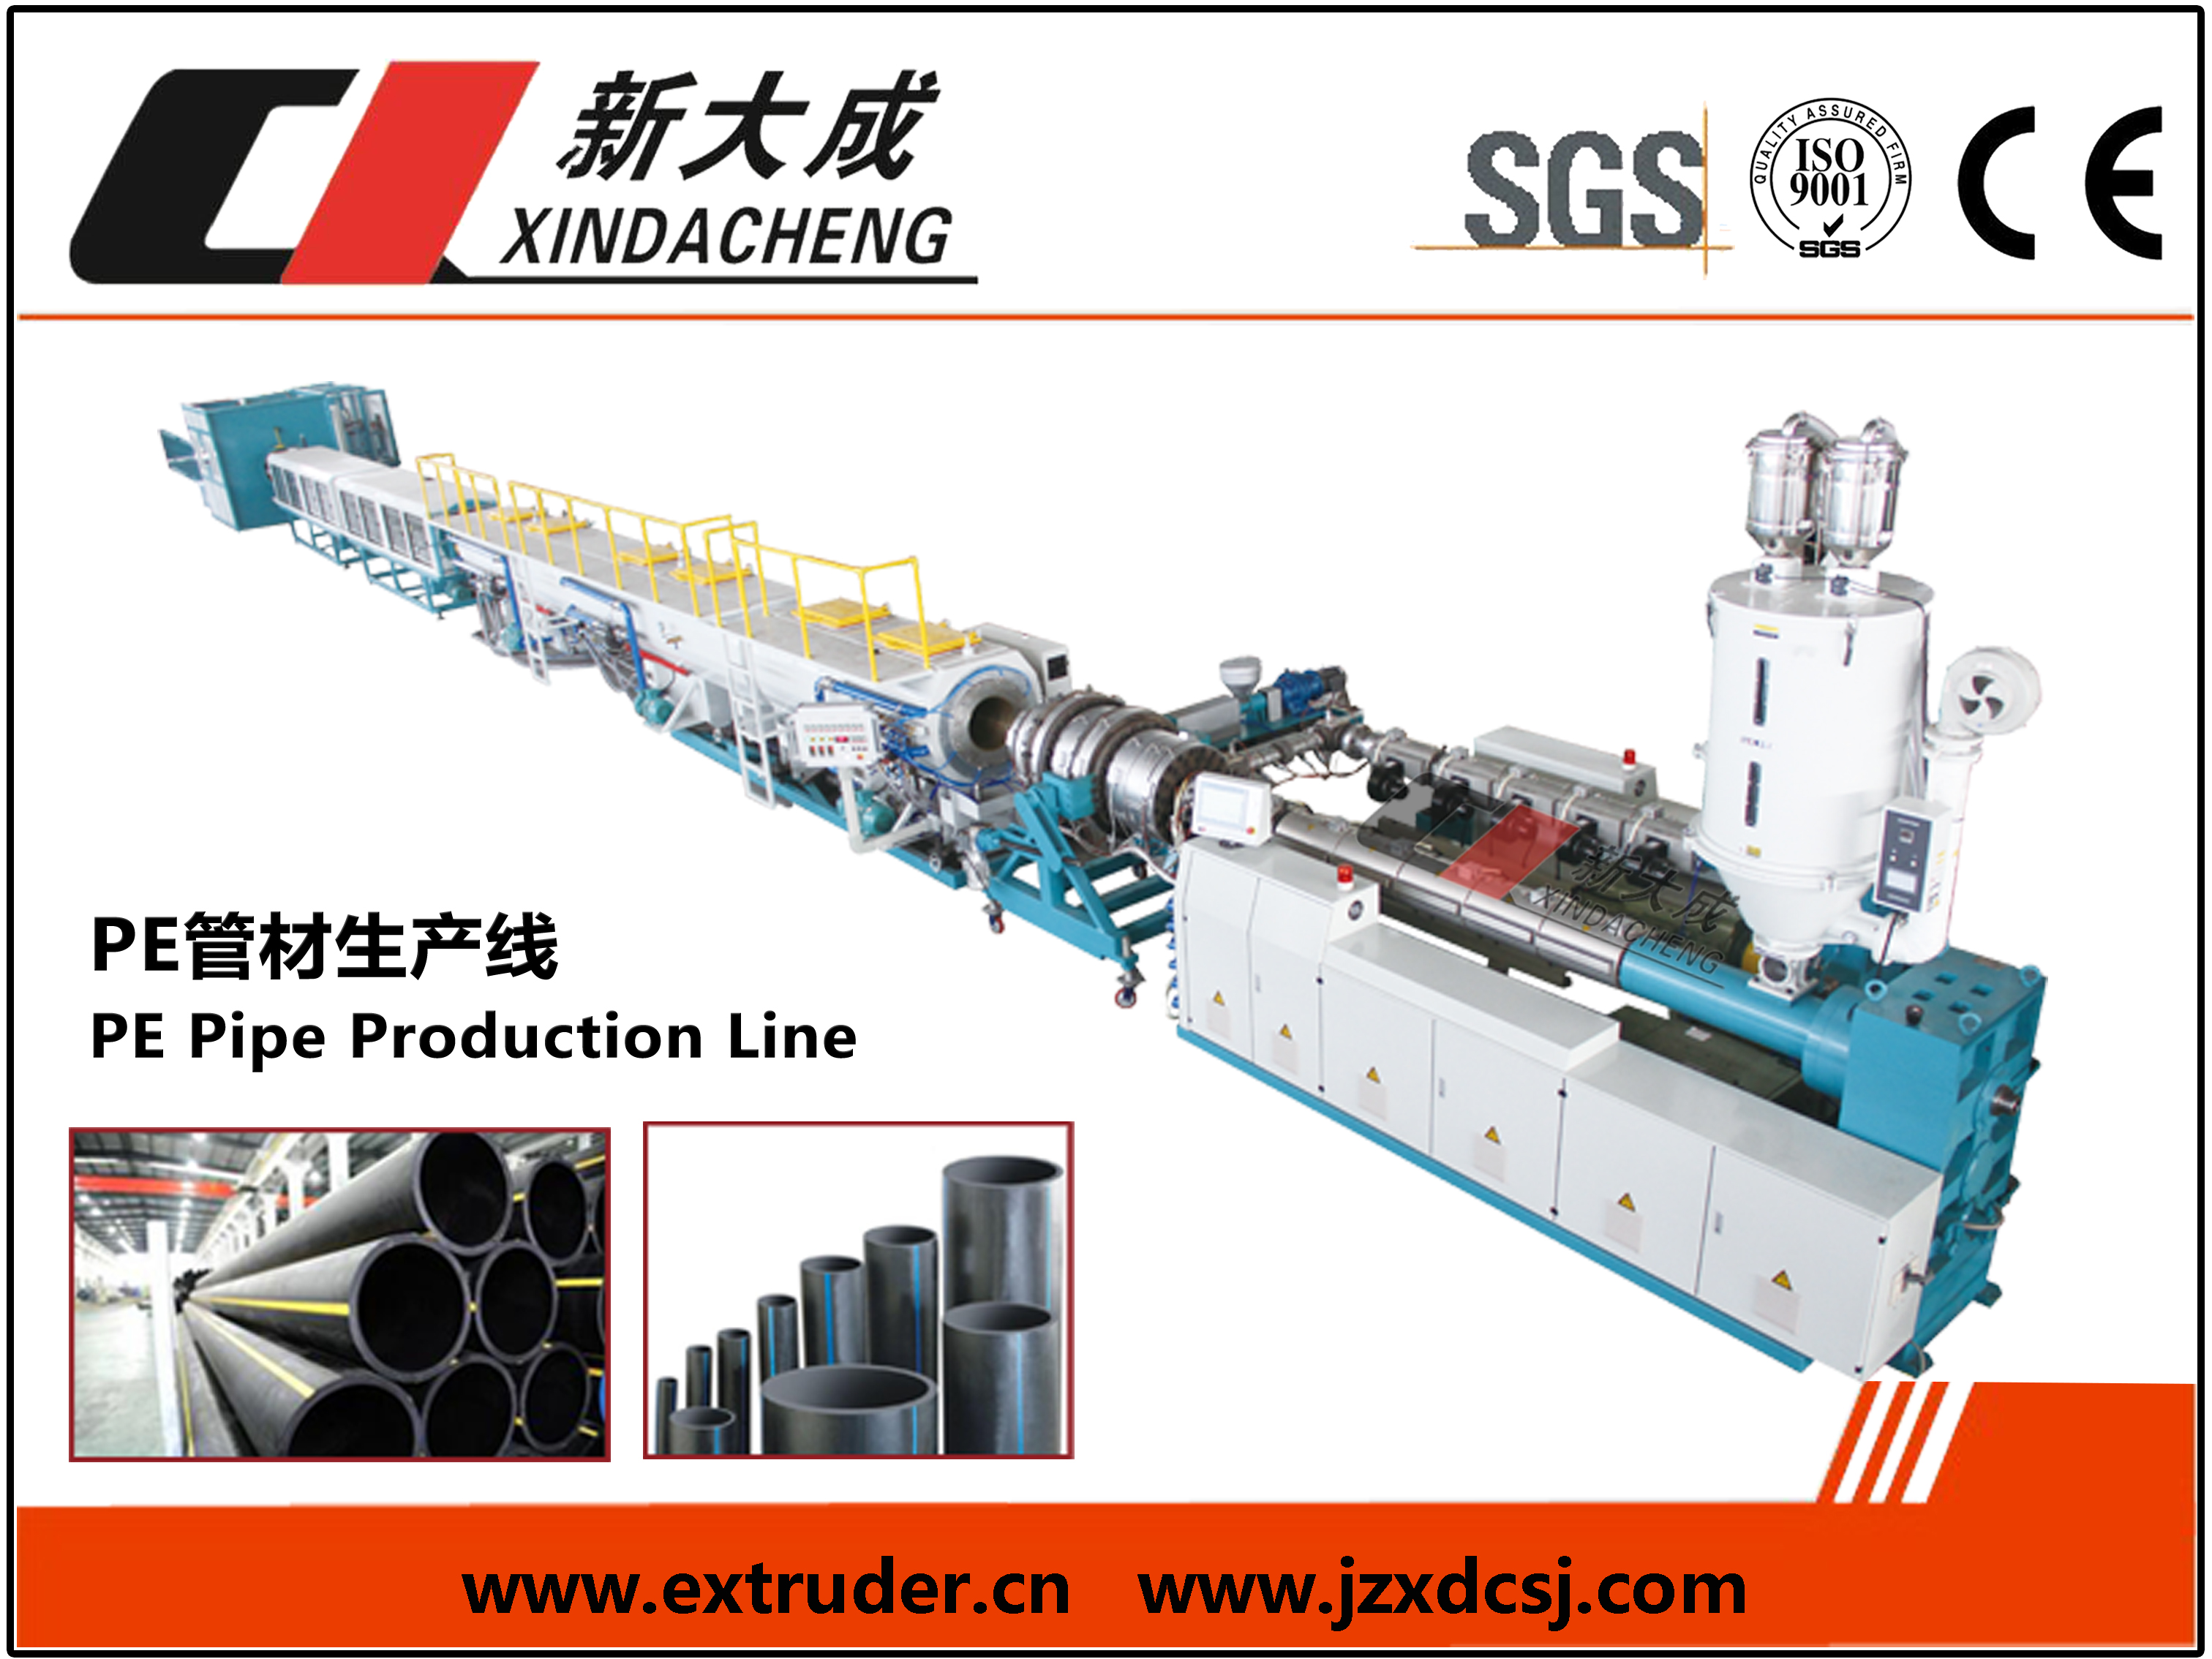 HDPE630 pipe Extrusion Line start-up